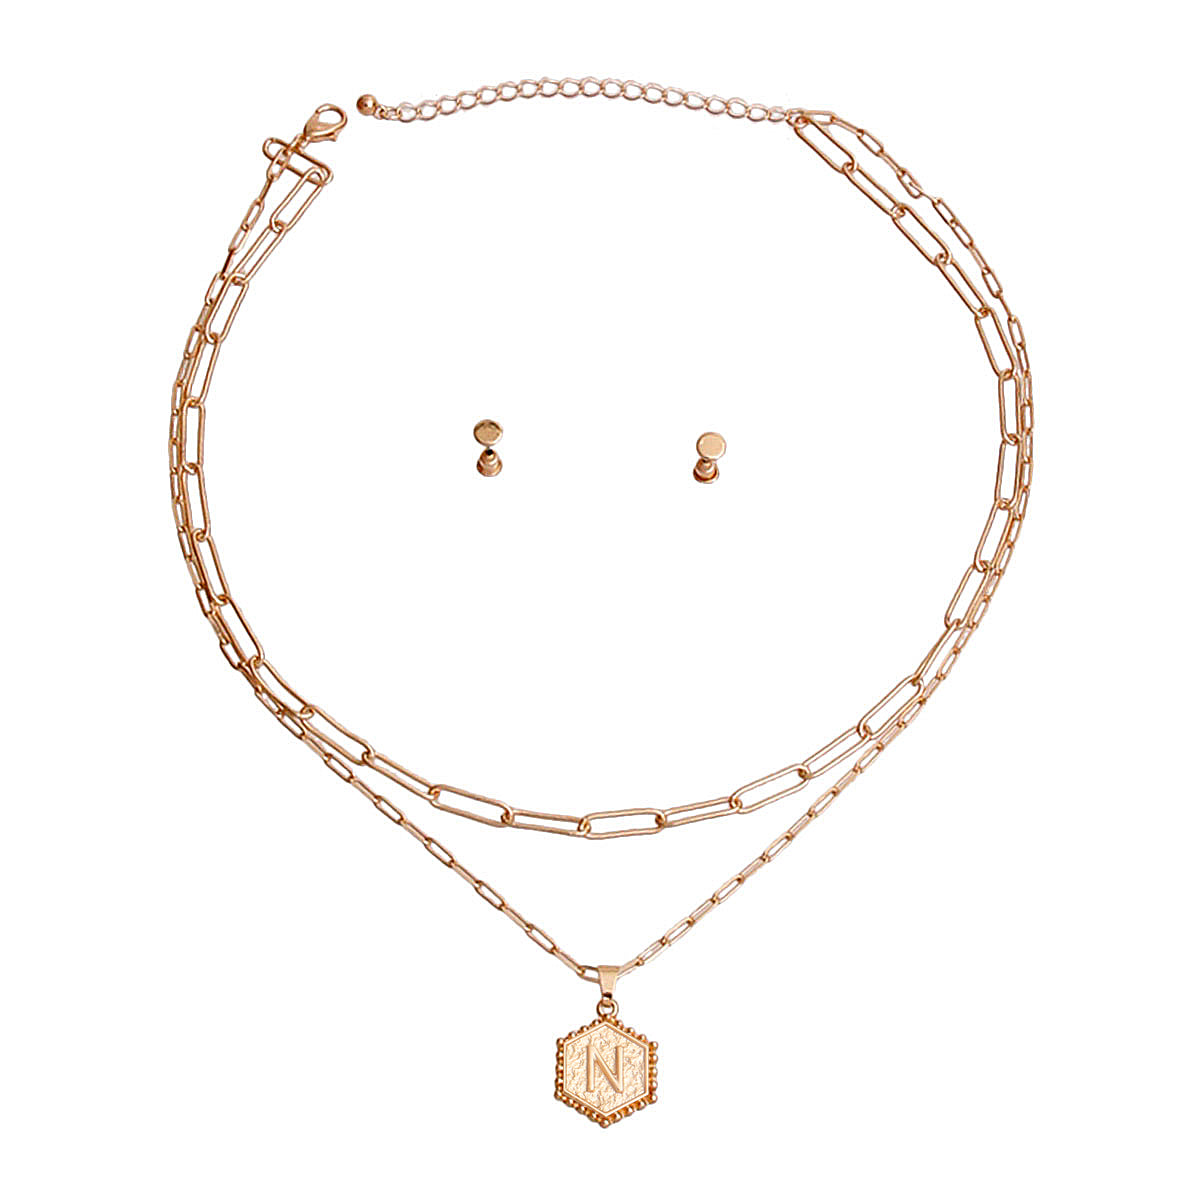 N Hexagon Initial Charm Necklace